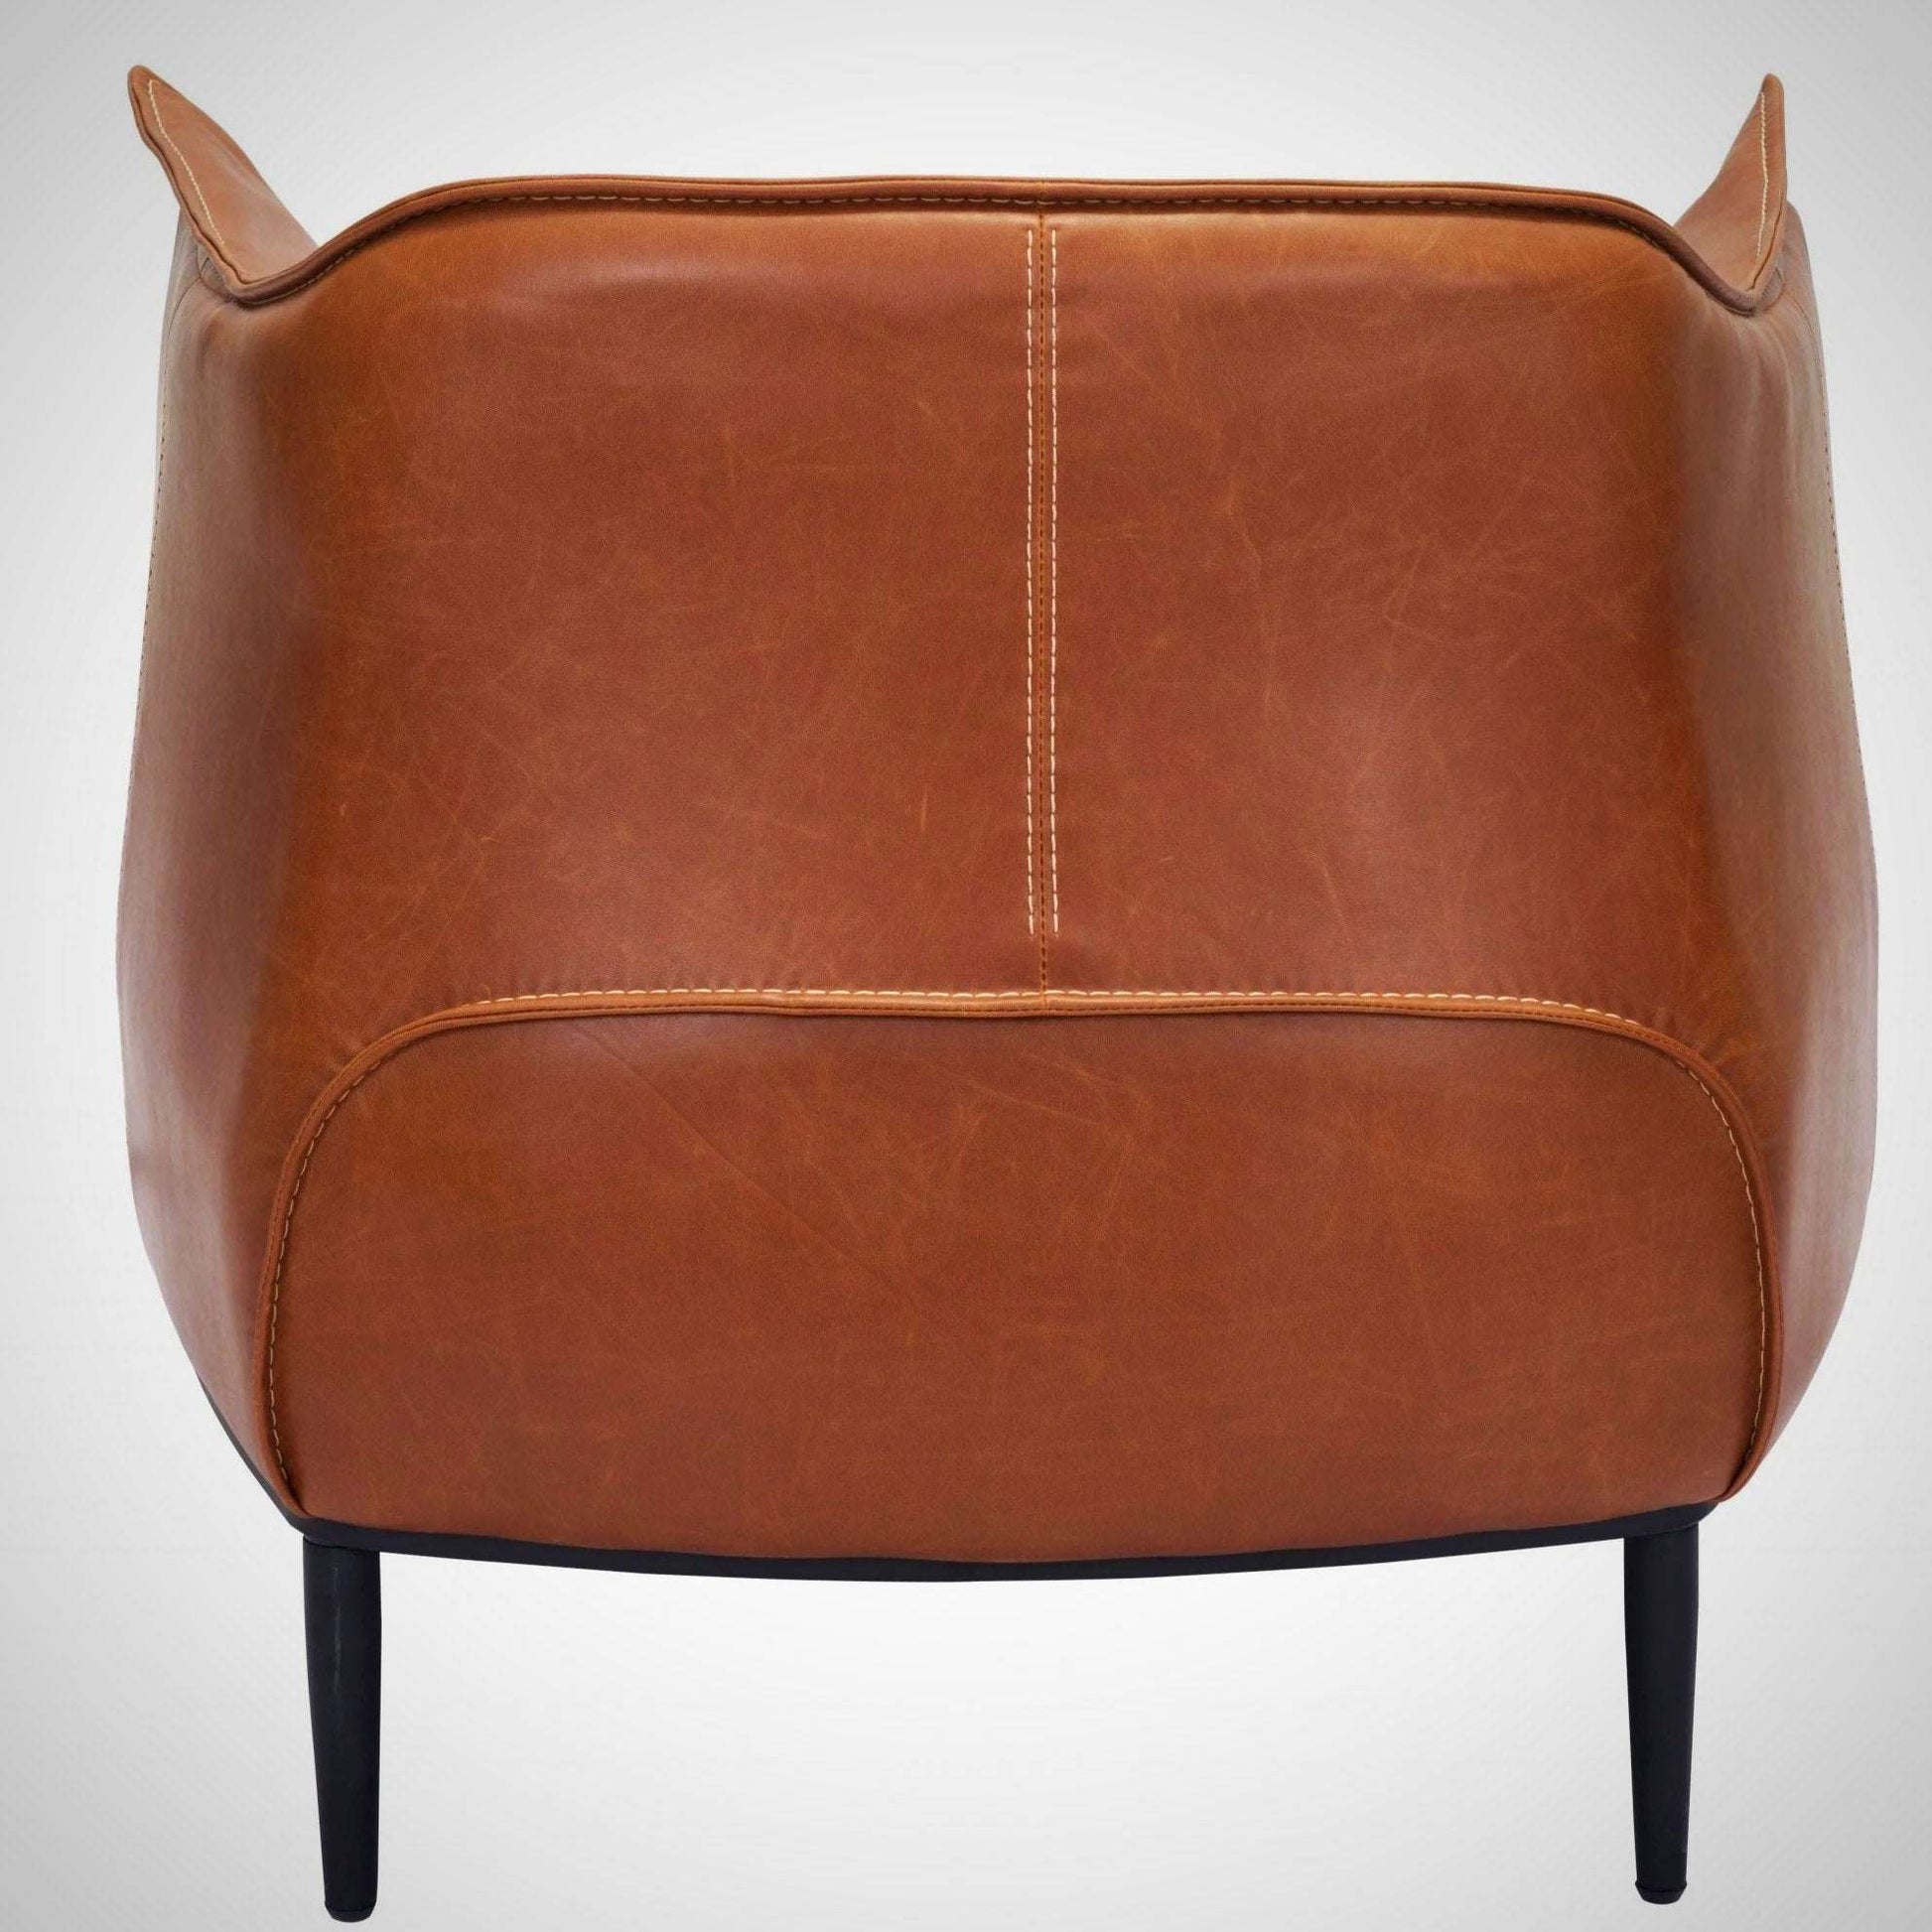 Coffny Accent Chair